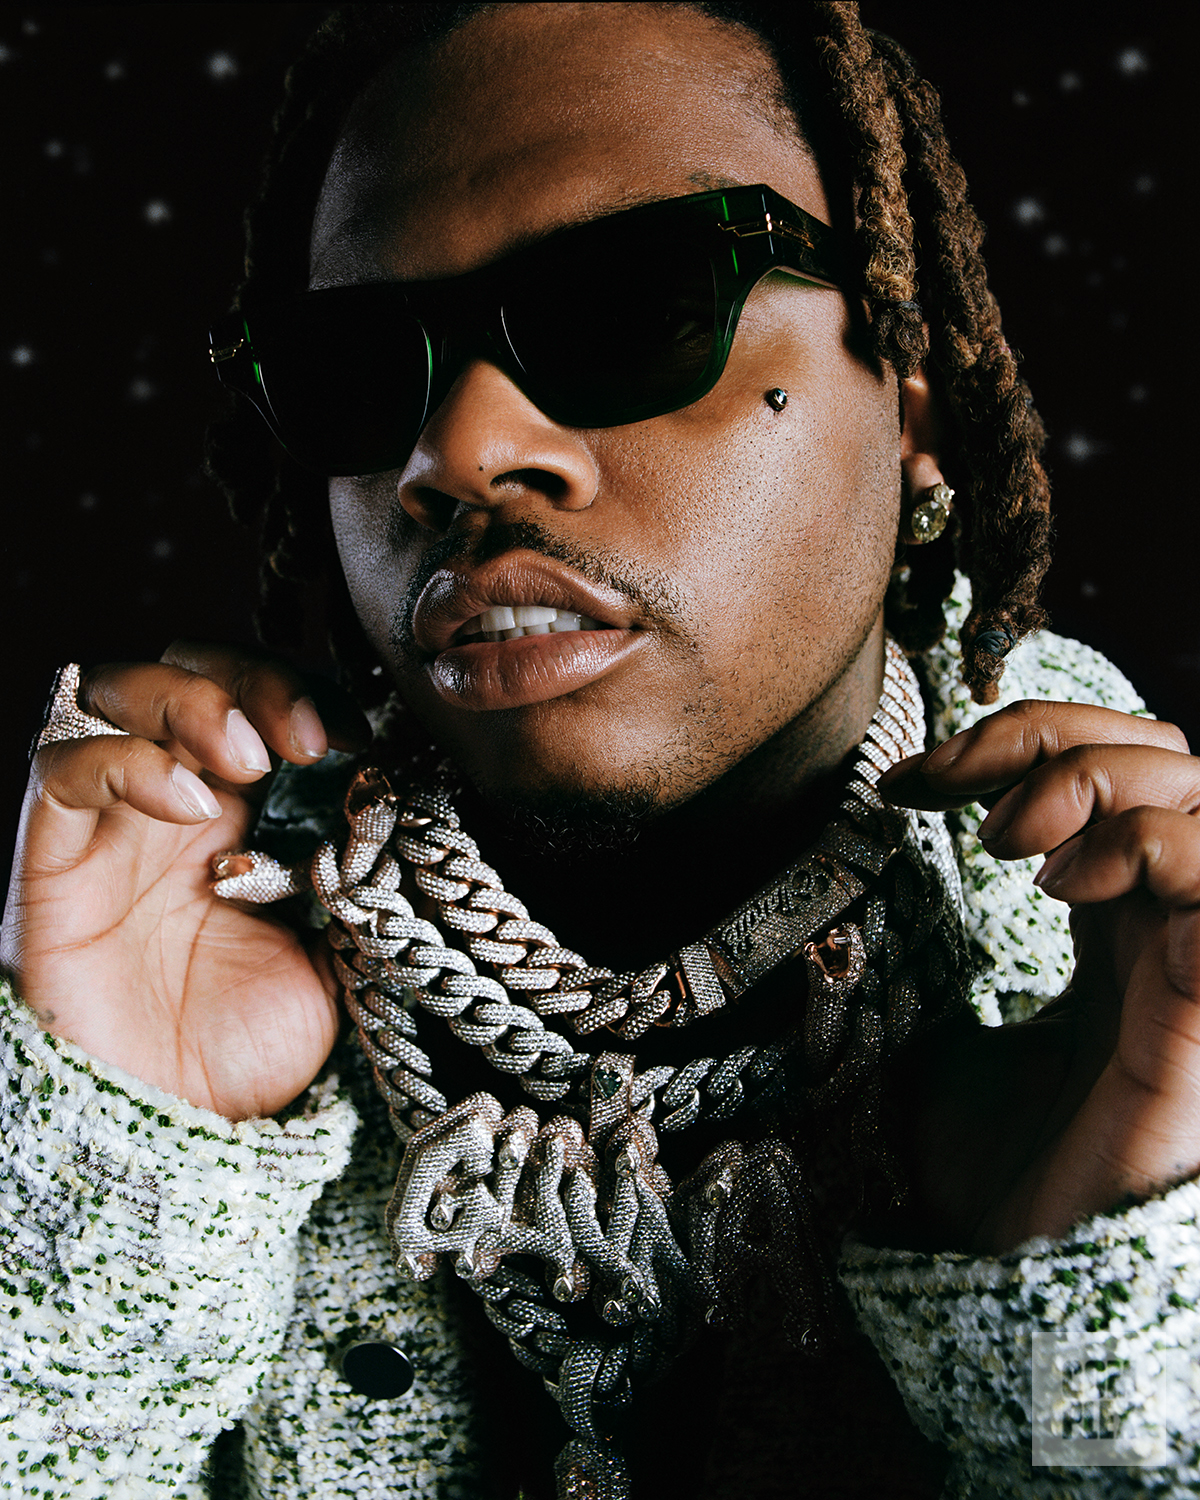 Gunna poses for his Complex interview